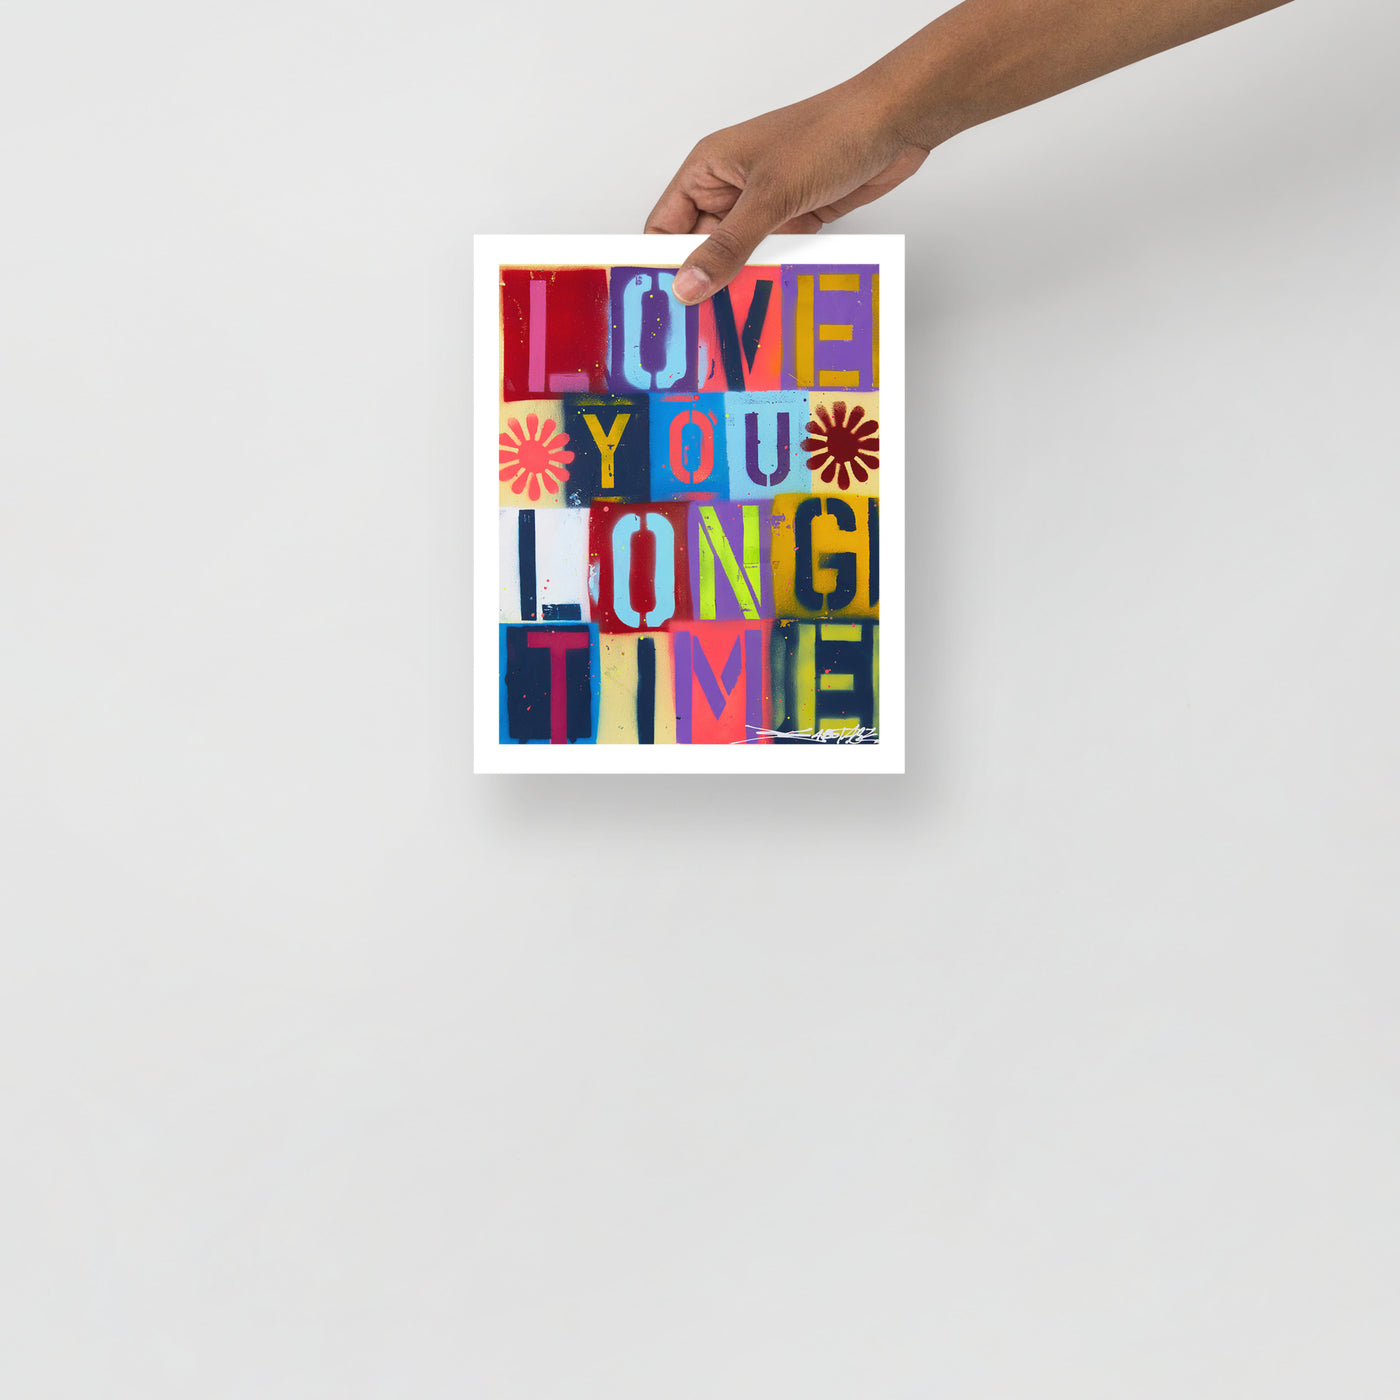 Love You Long Time - Poster Prints